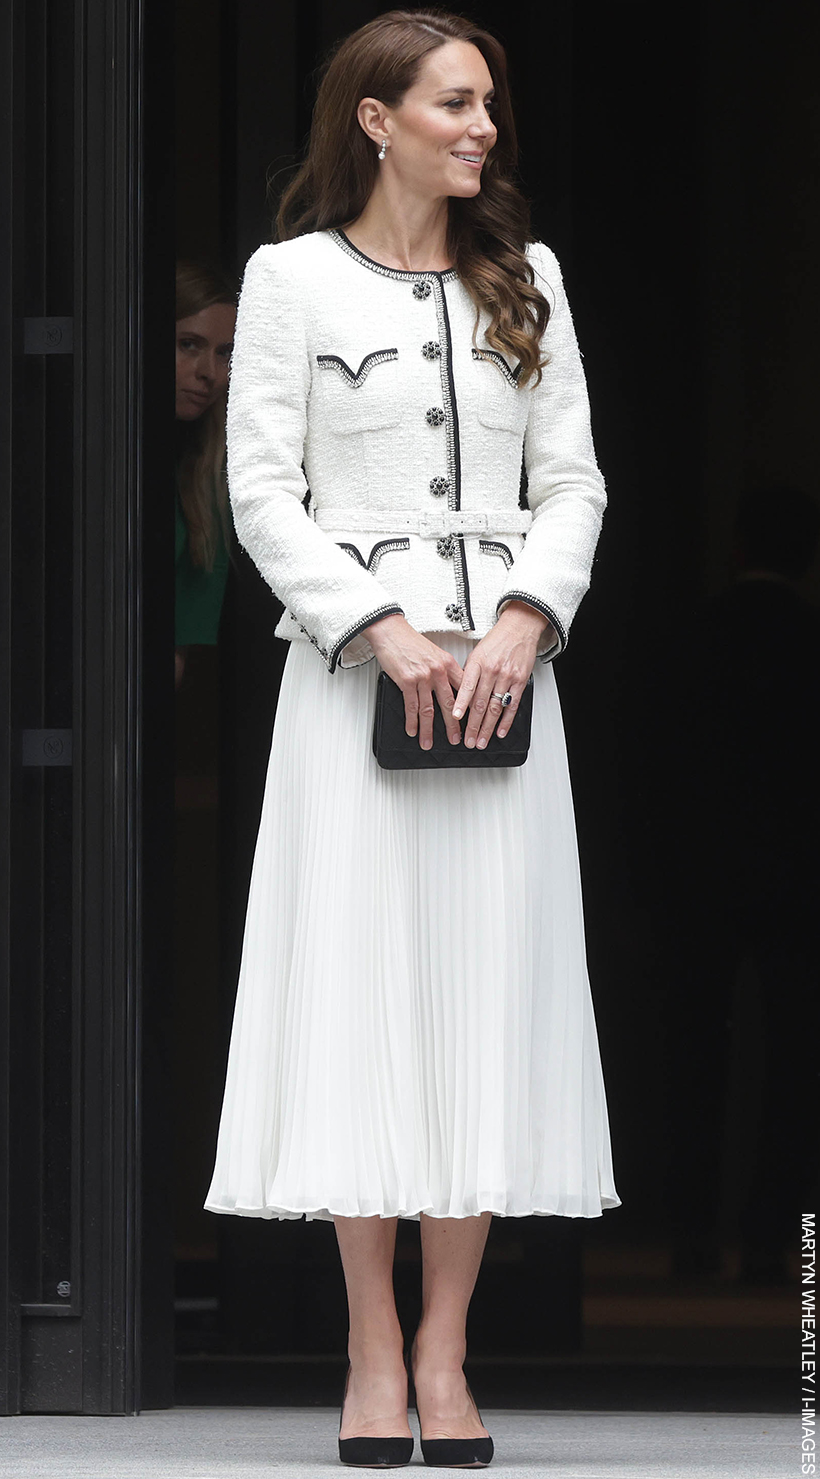 Kate Middleton wearing a white Self Portrait dress, carrying a Chanel clutch and wearing black slingbacks from Aquazzura at the National Portrait Gallery today